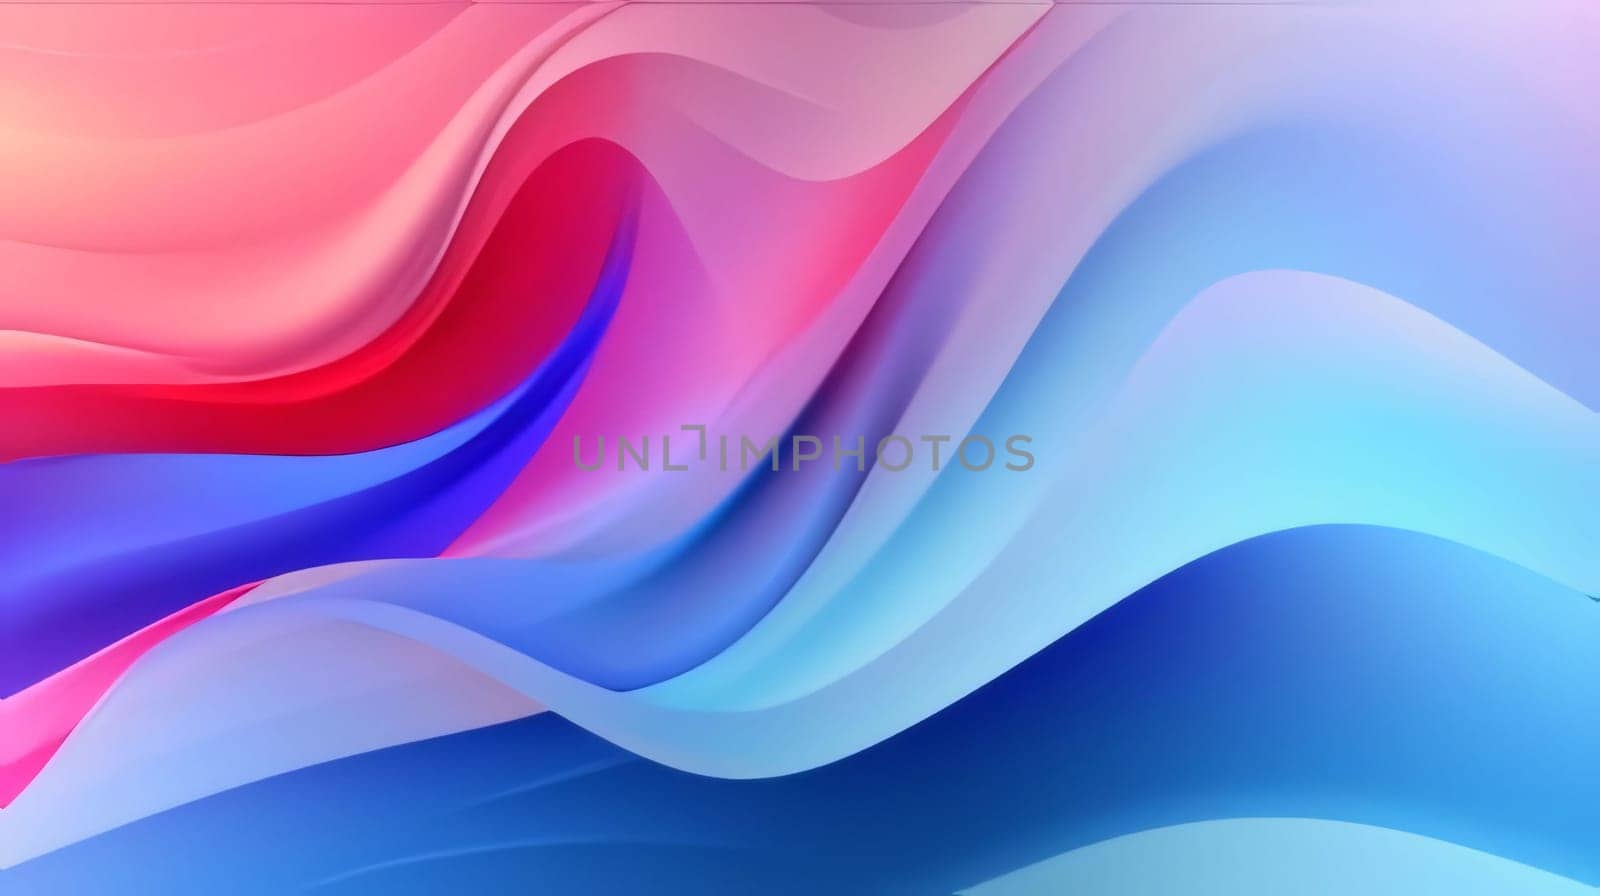 Abstract background design: abstract colorful background with smooth lines in blue, pink and violet colors